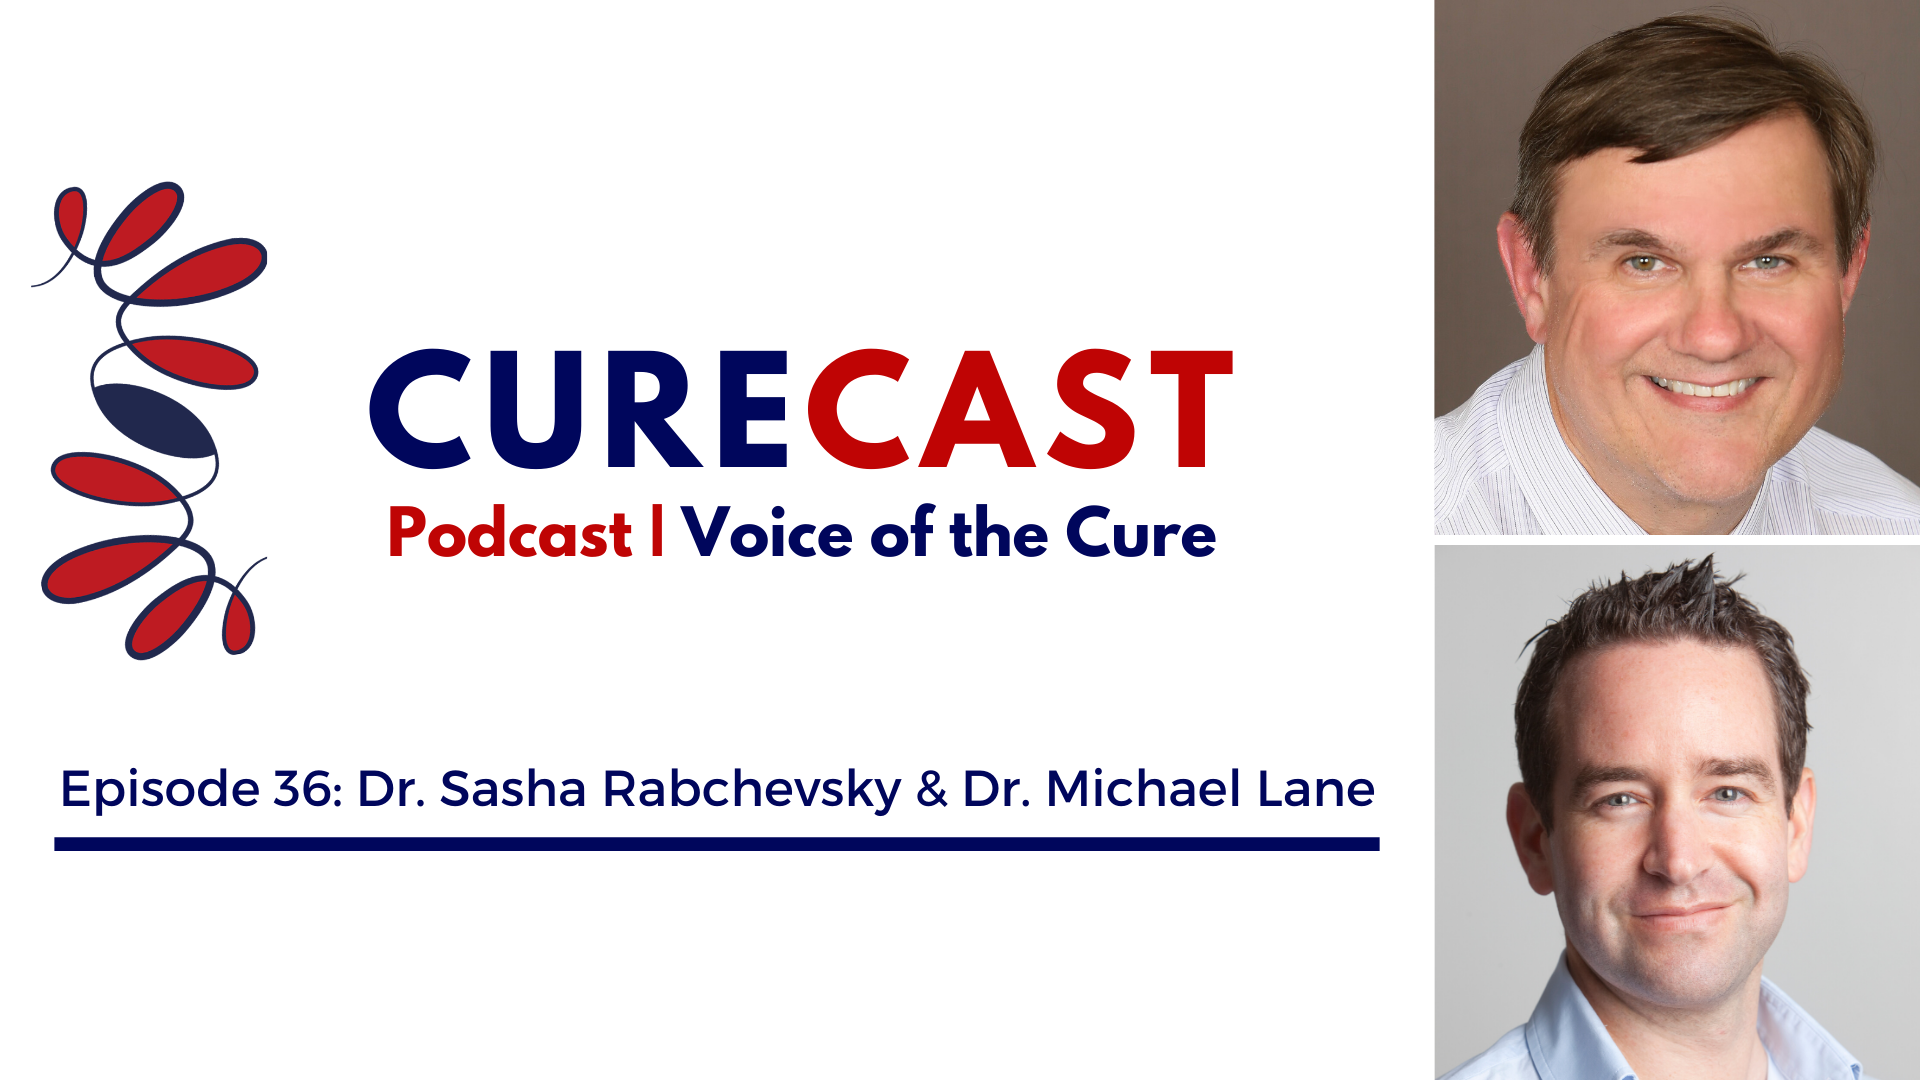 CureCast Epsiode 37: An Interview with Drs. Sasha Rabchevsky and Michael Lane